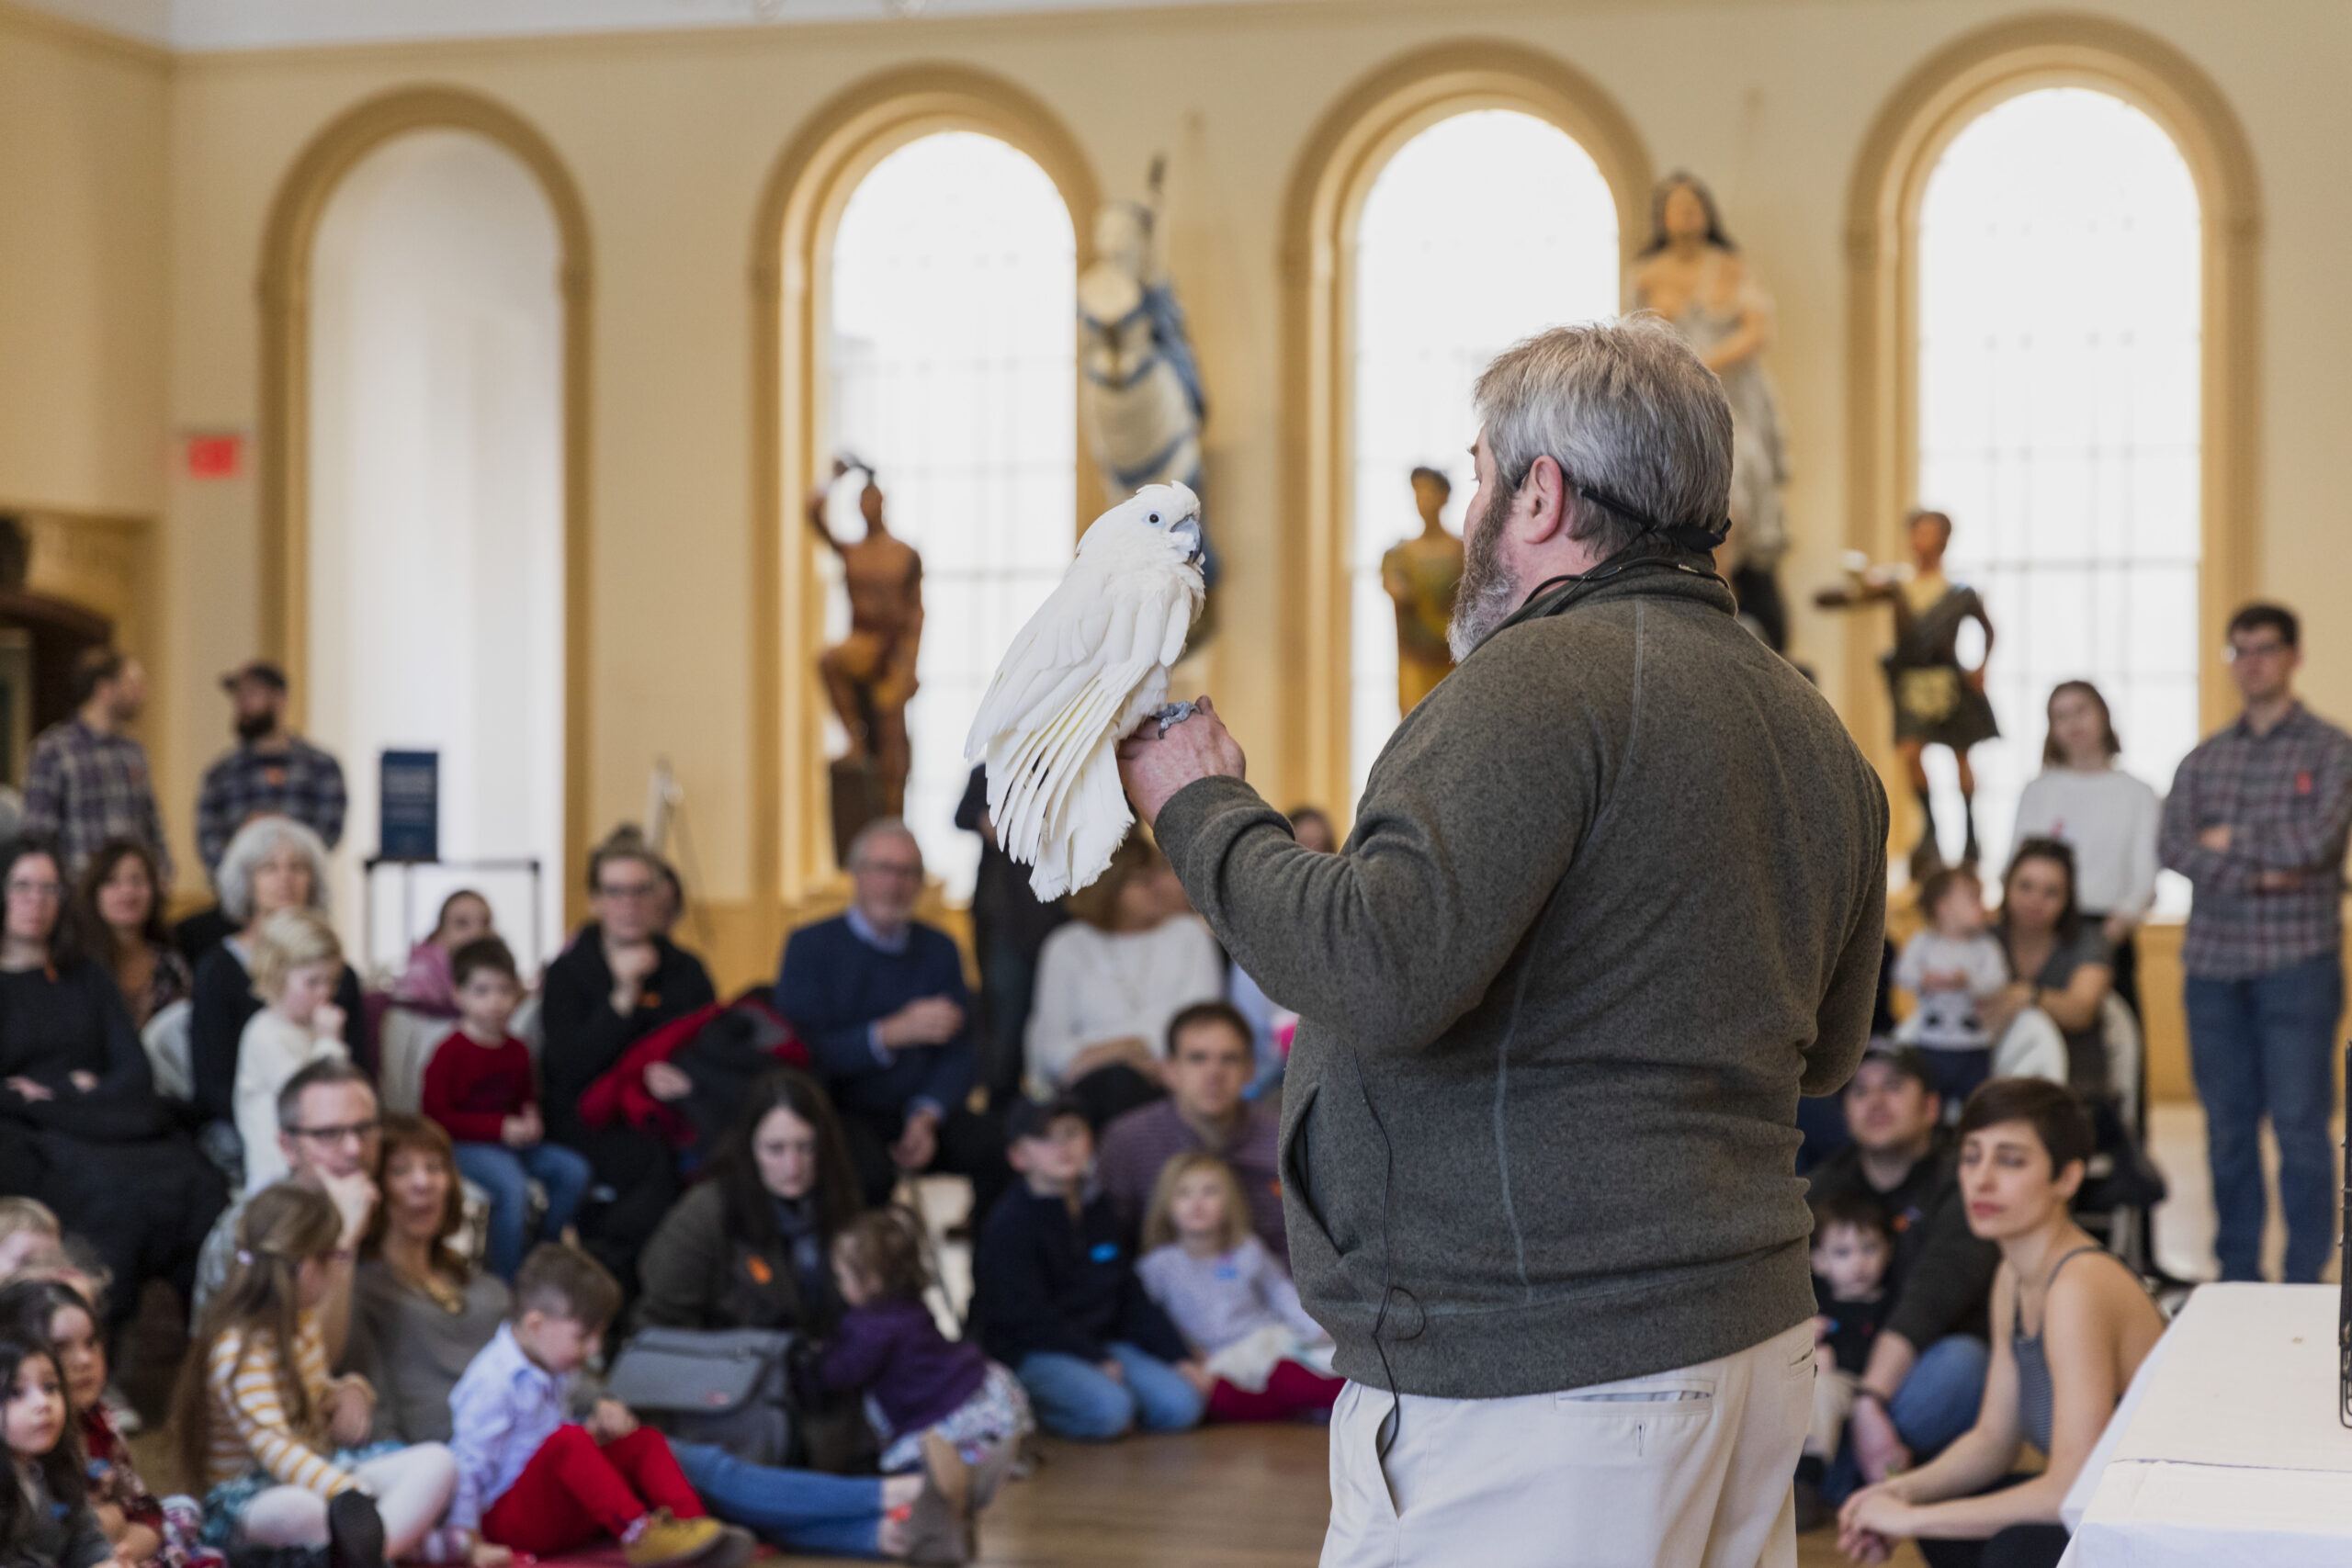 A speaker addressing an audience inside a museum with a bird perched on his hand